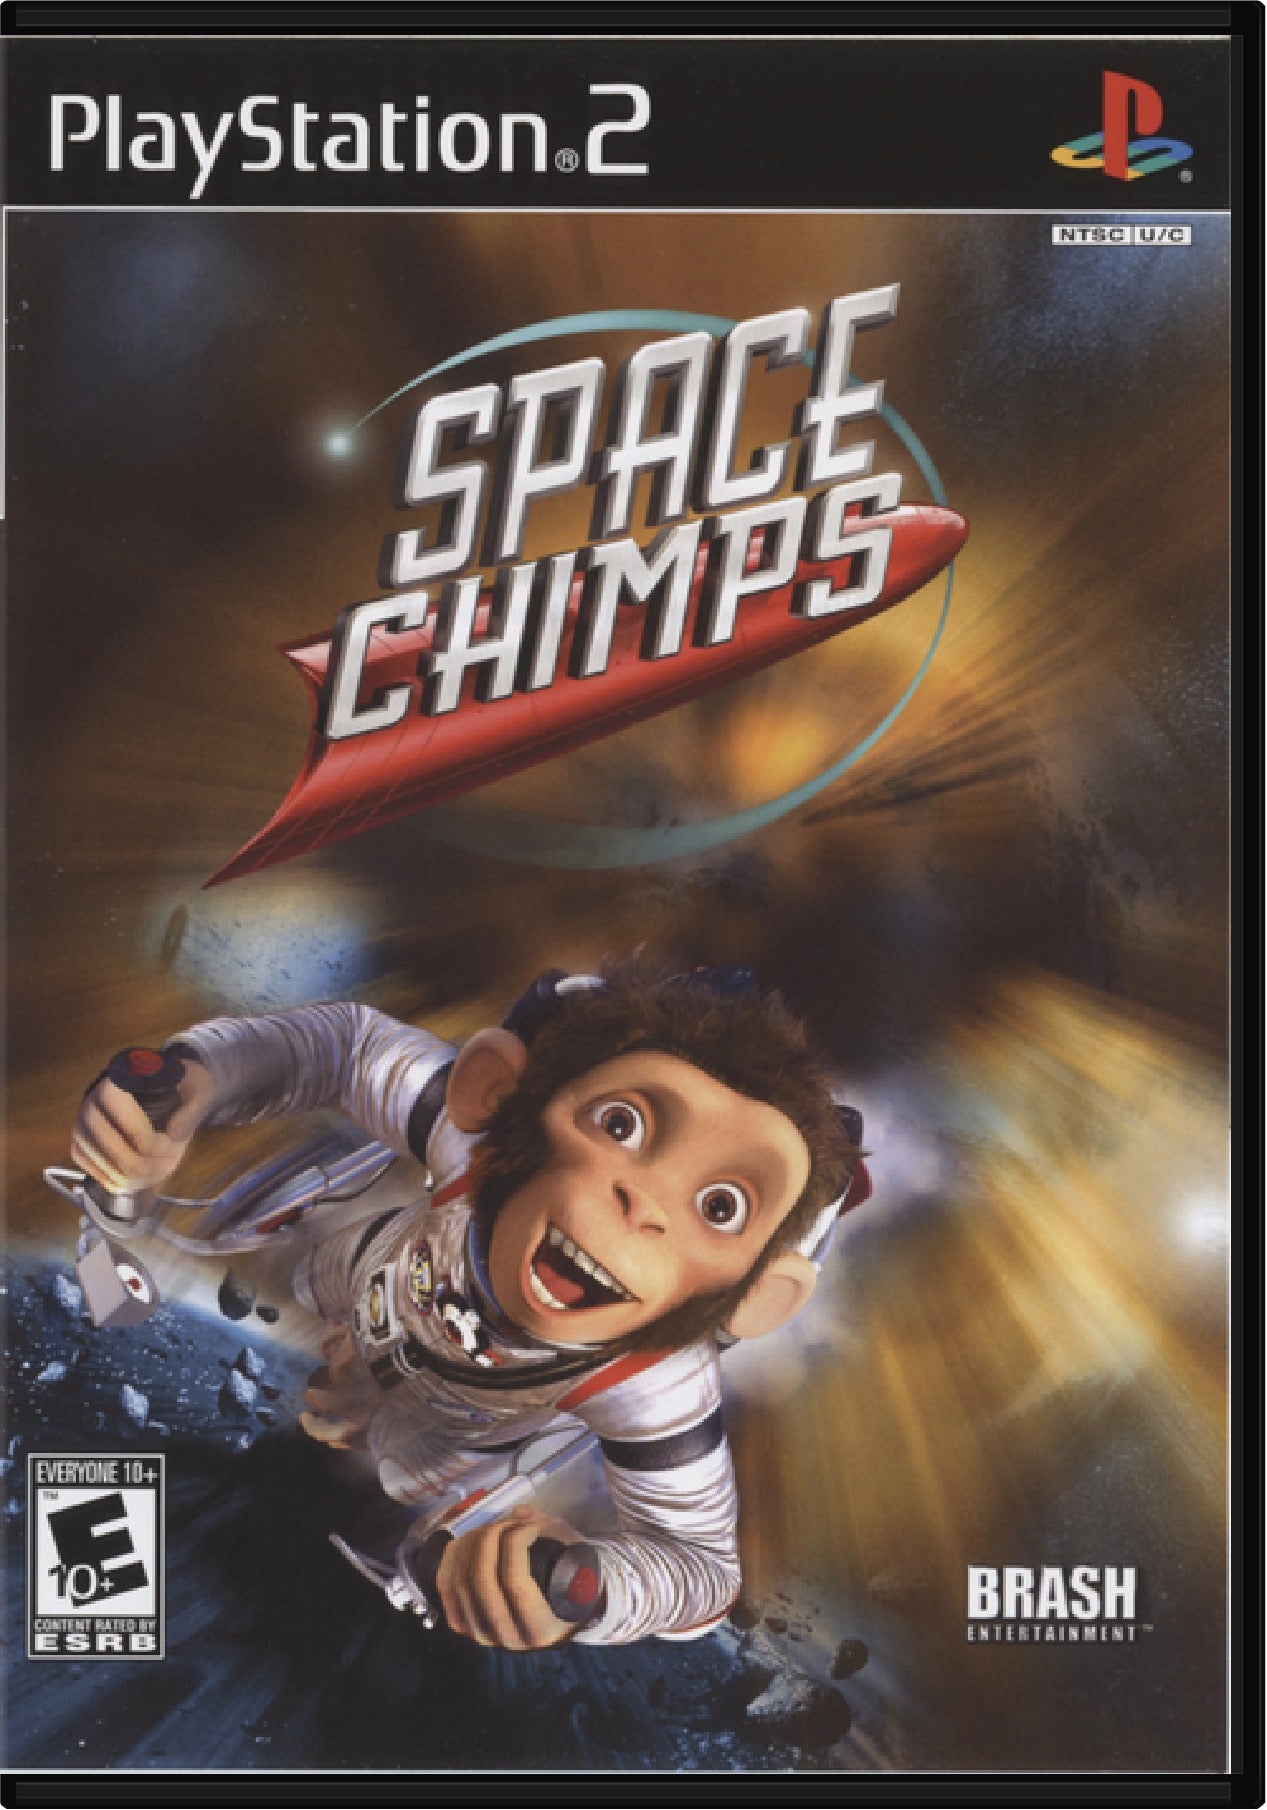 Space Chimps Cover Art and Product Photo